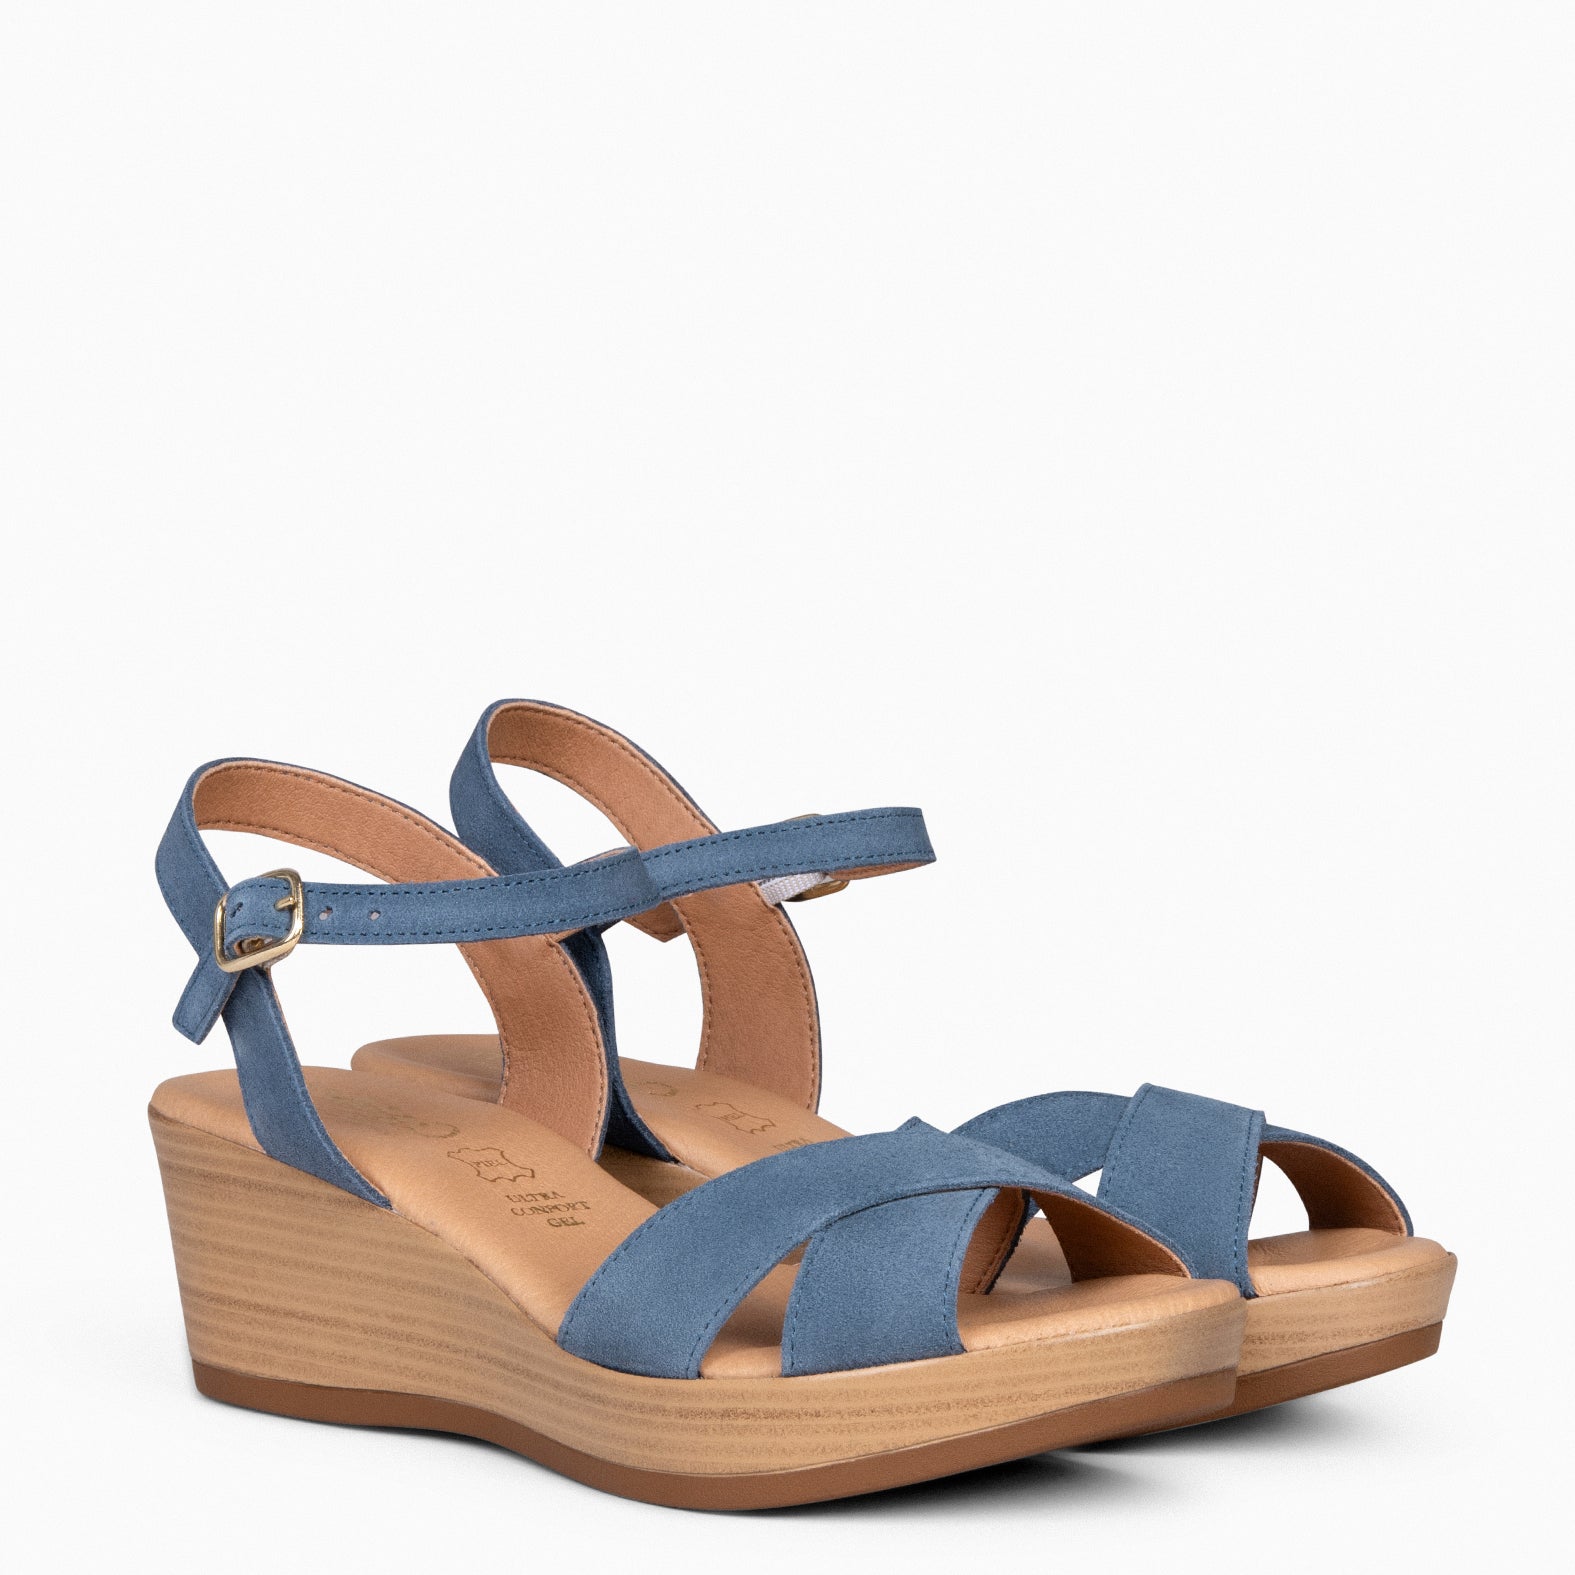 MAR – BLUE JEANS WEDGE SHOES